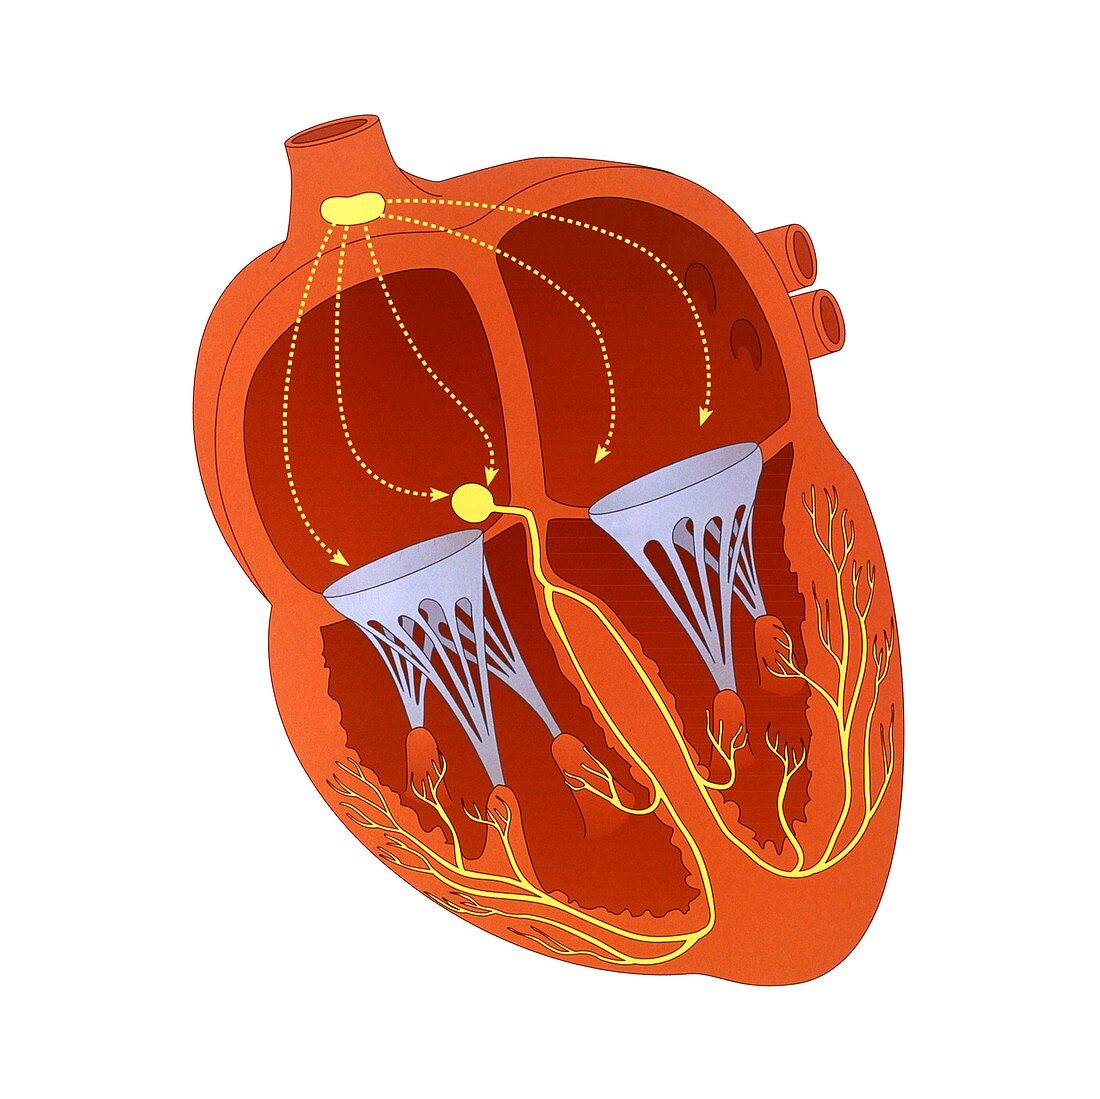 Heart conduction system